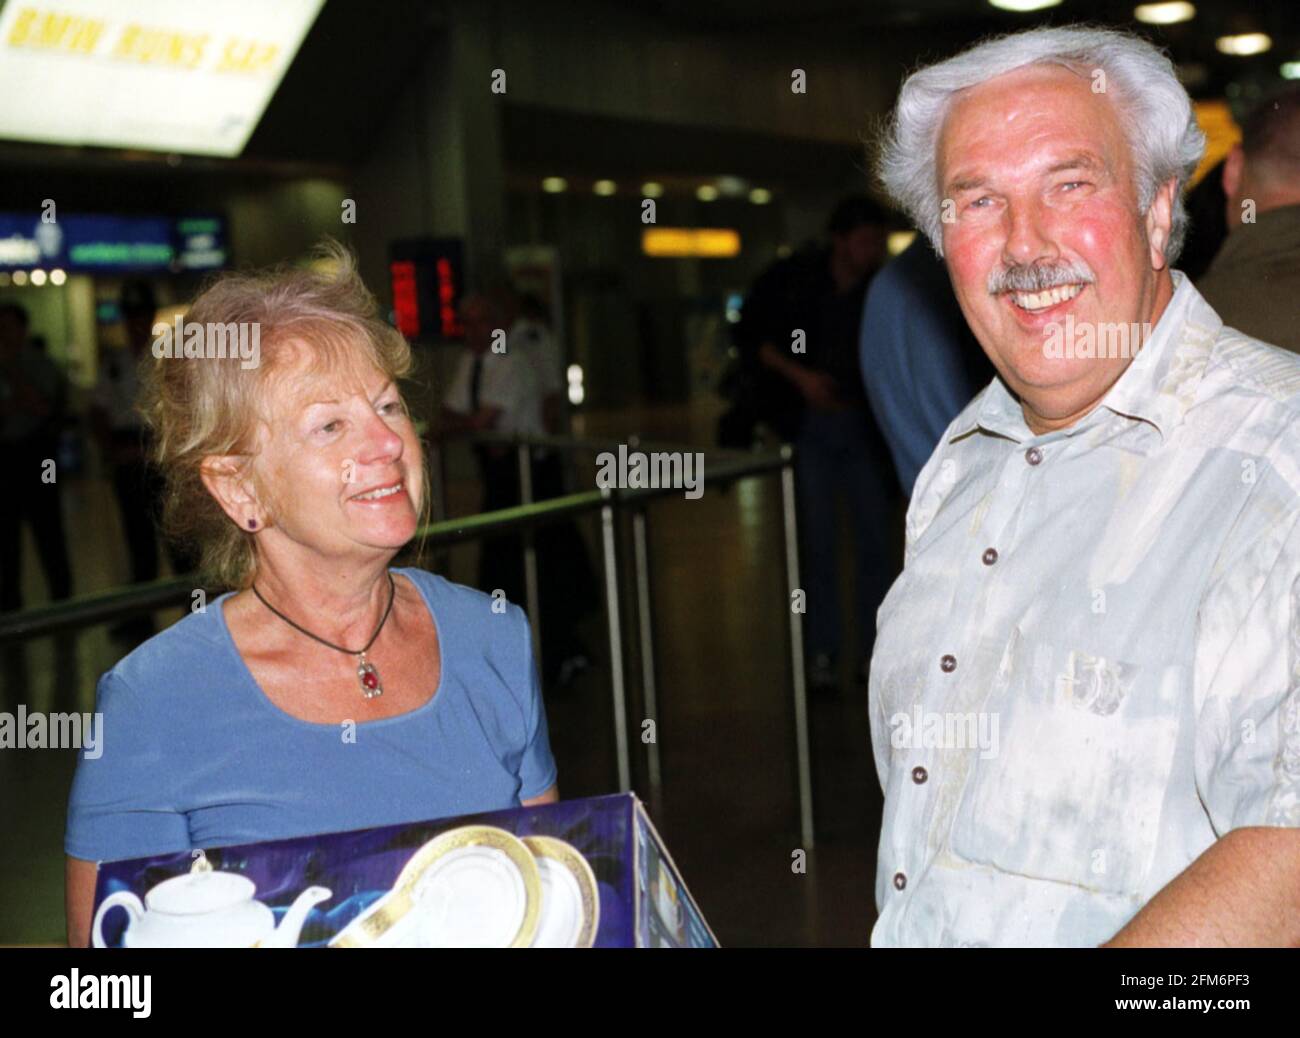 Sri Lanka Columbo Airport Tamil Tiger Attack  July 2001 Edward and Shiela Nicholls two of the Britons caught up in the Tamil Tiger attack on Columbo Airport seen here returning to Heathrow Airport Stock Photo